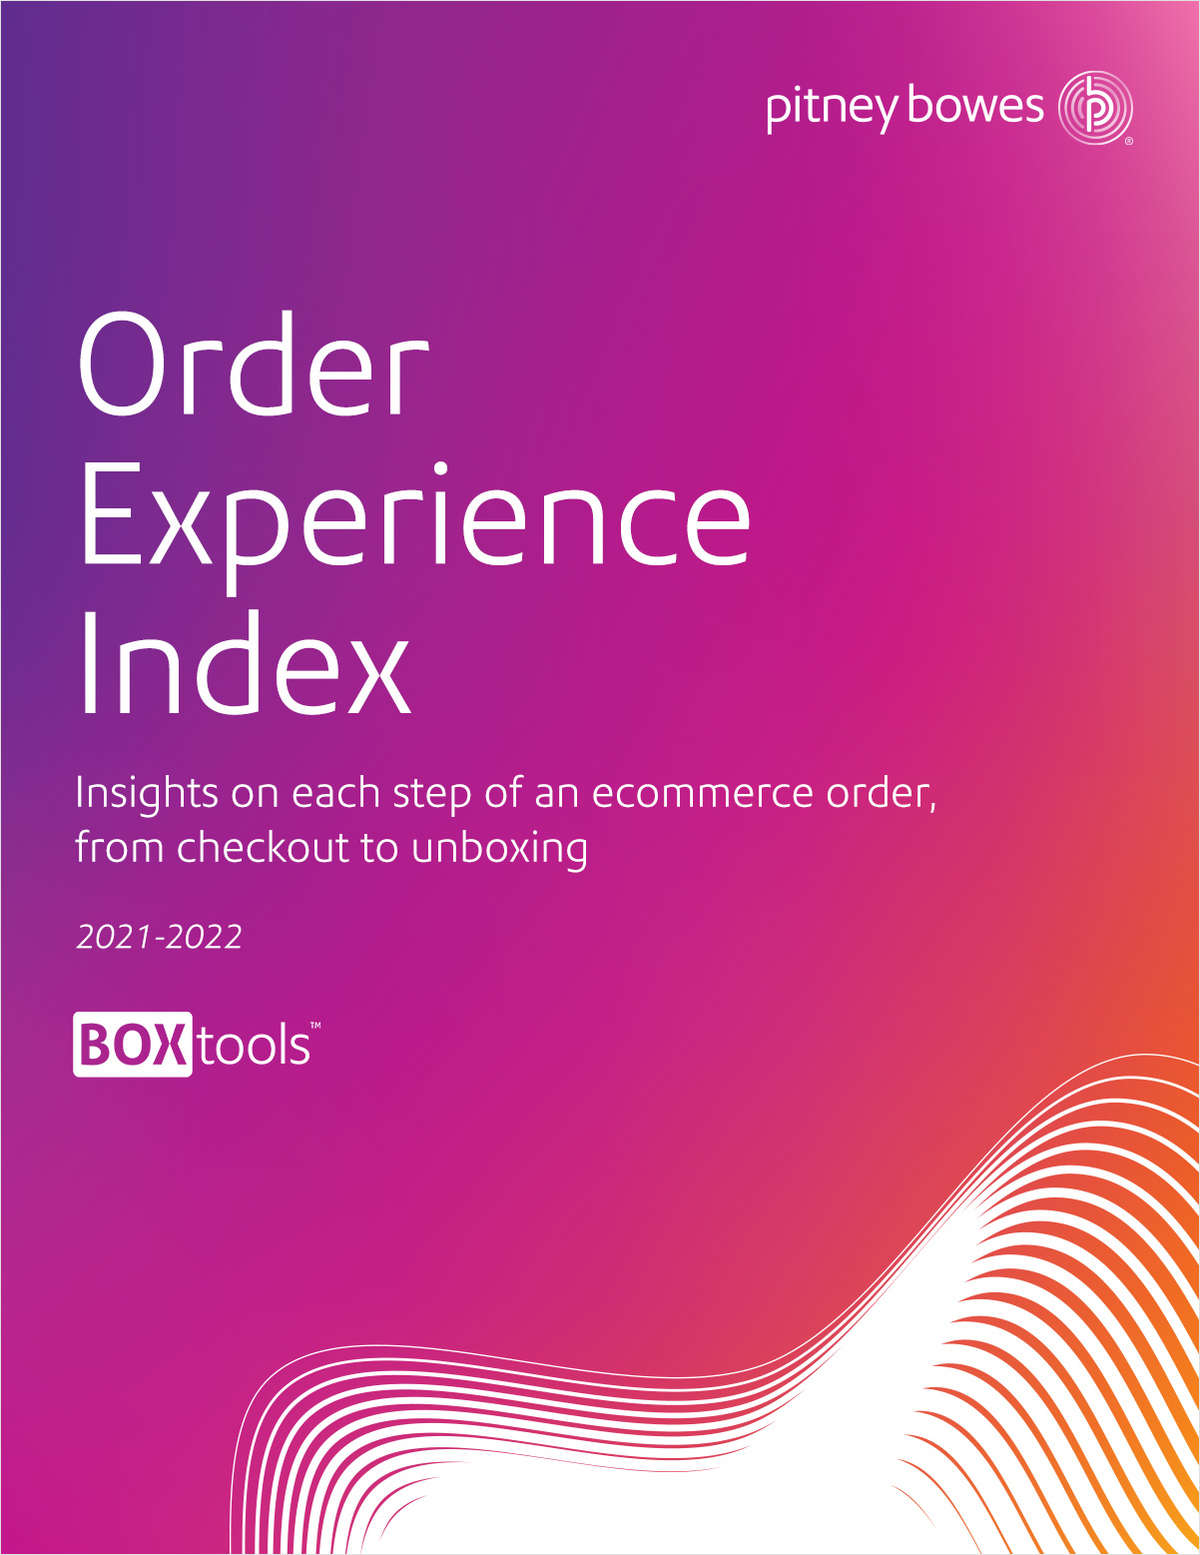 Pitney Bowes 2021-2022 Order Experience Index